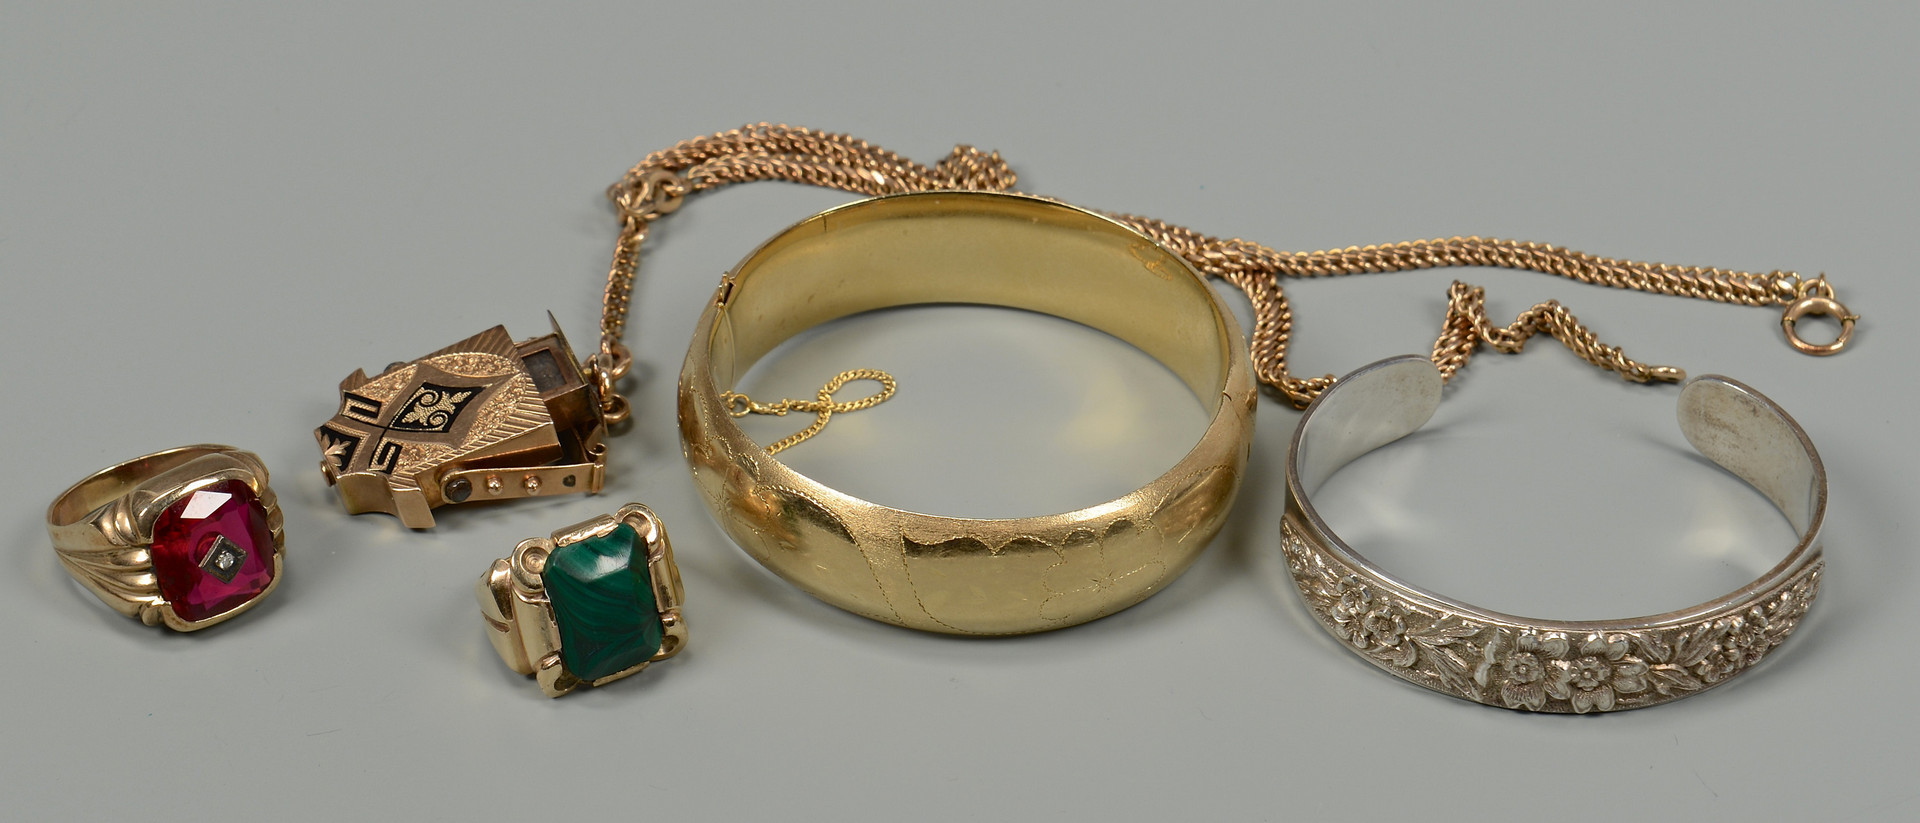 Lot 594: 5 Articles of Vintage Jewelry